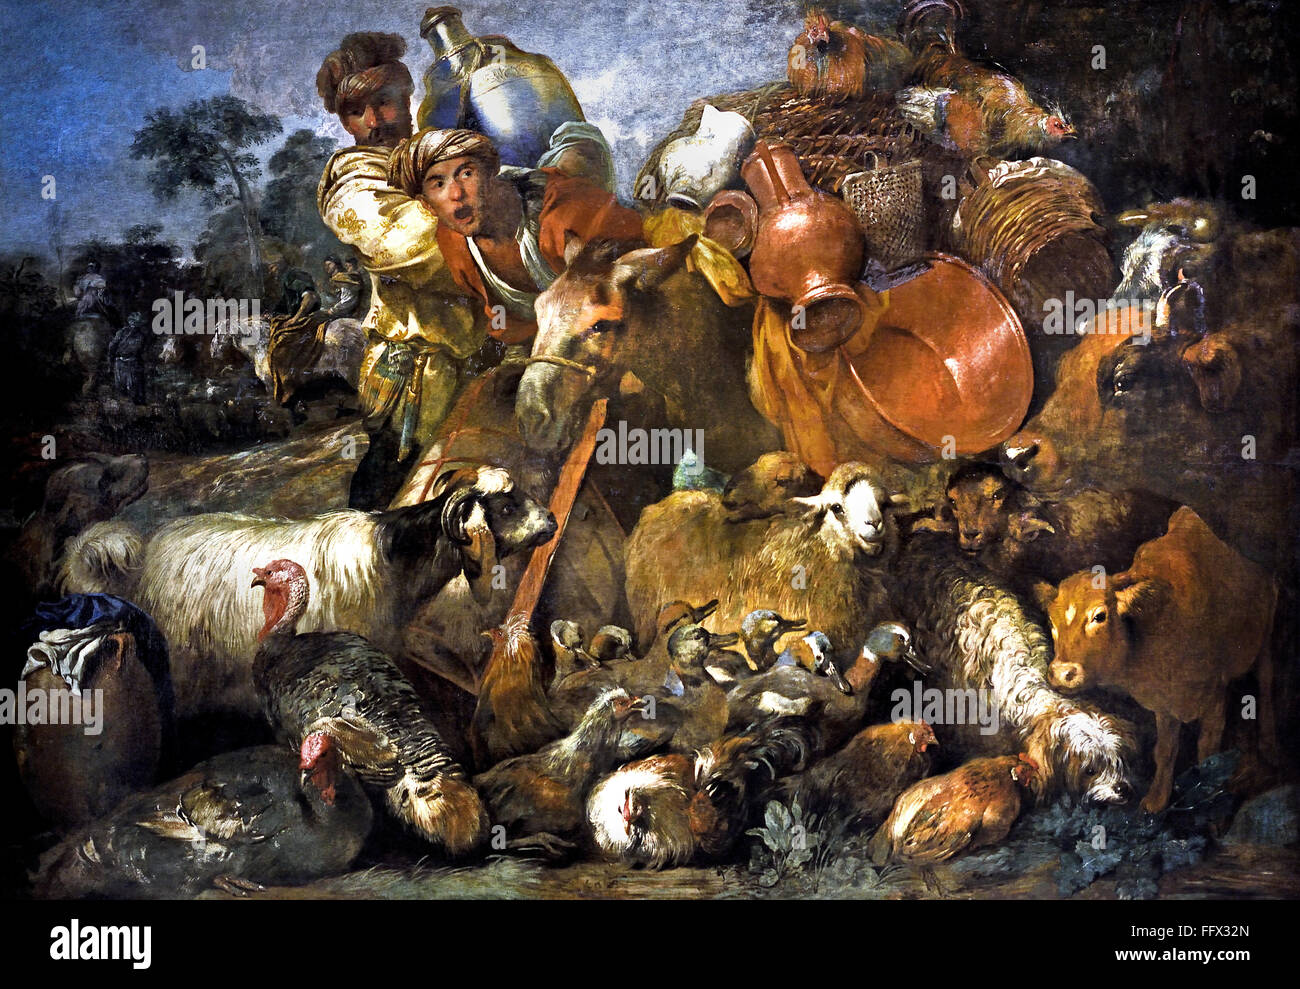 GIOVANNI BENEDETTO CASTIGLIONE (1616 - 1670)  CARAVAN 1635 Italy Italian Here the subject could well be the Journey of Jacob, of David or even of Abraham, accompanied by their flock. Stock Photo